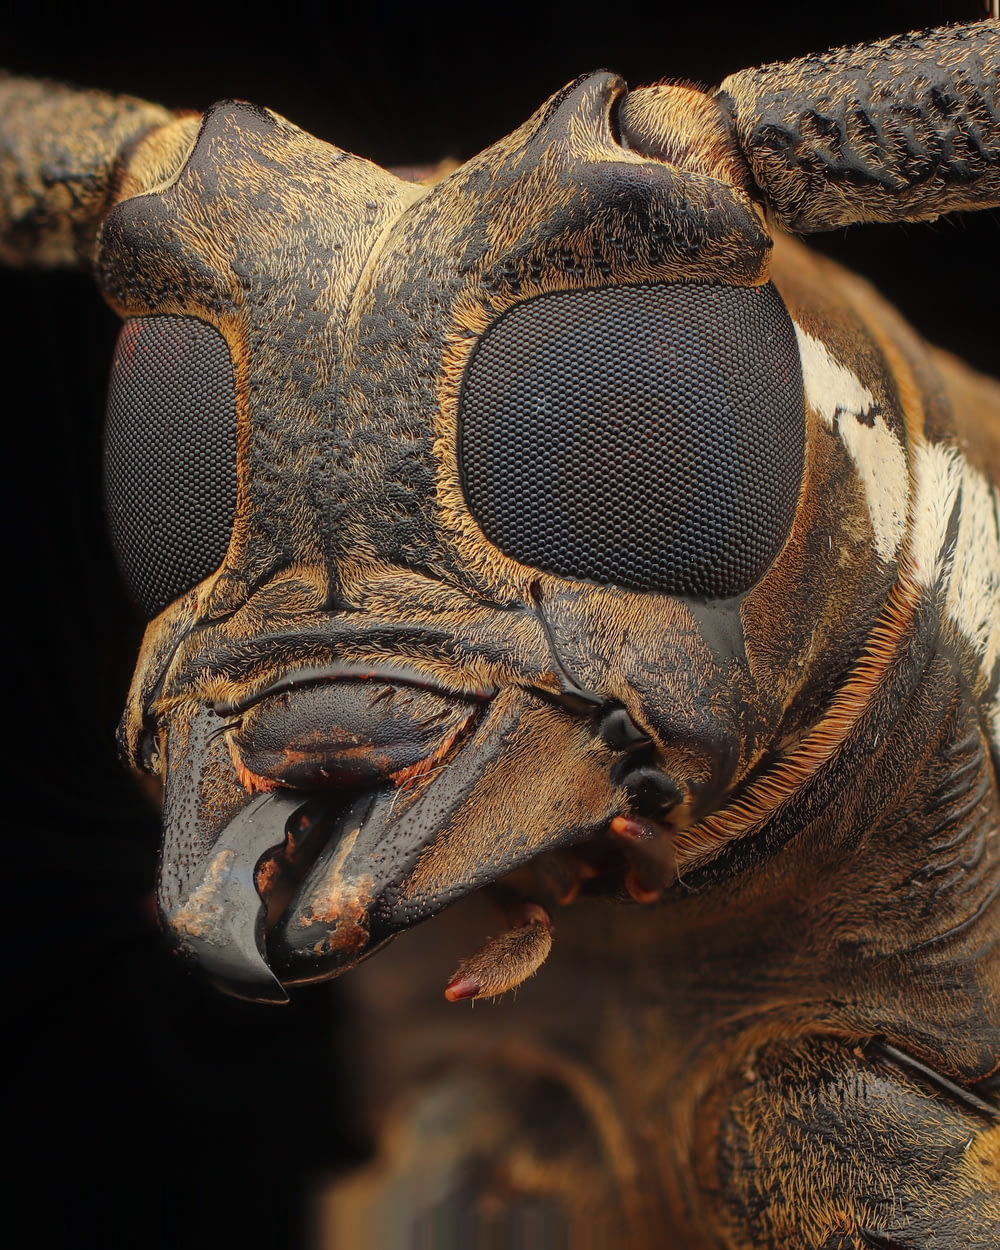 a close up of a bug's face and eyes